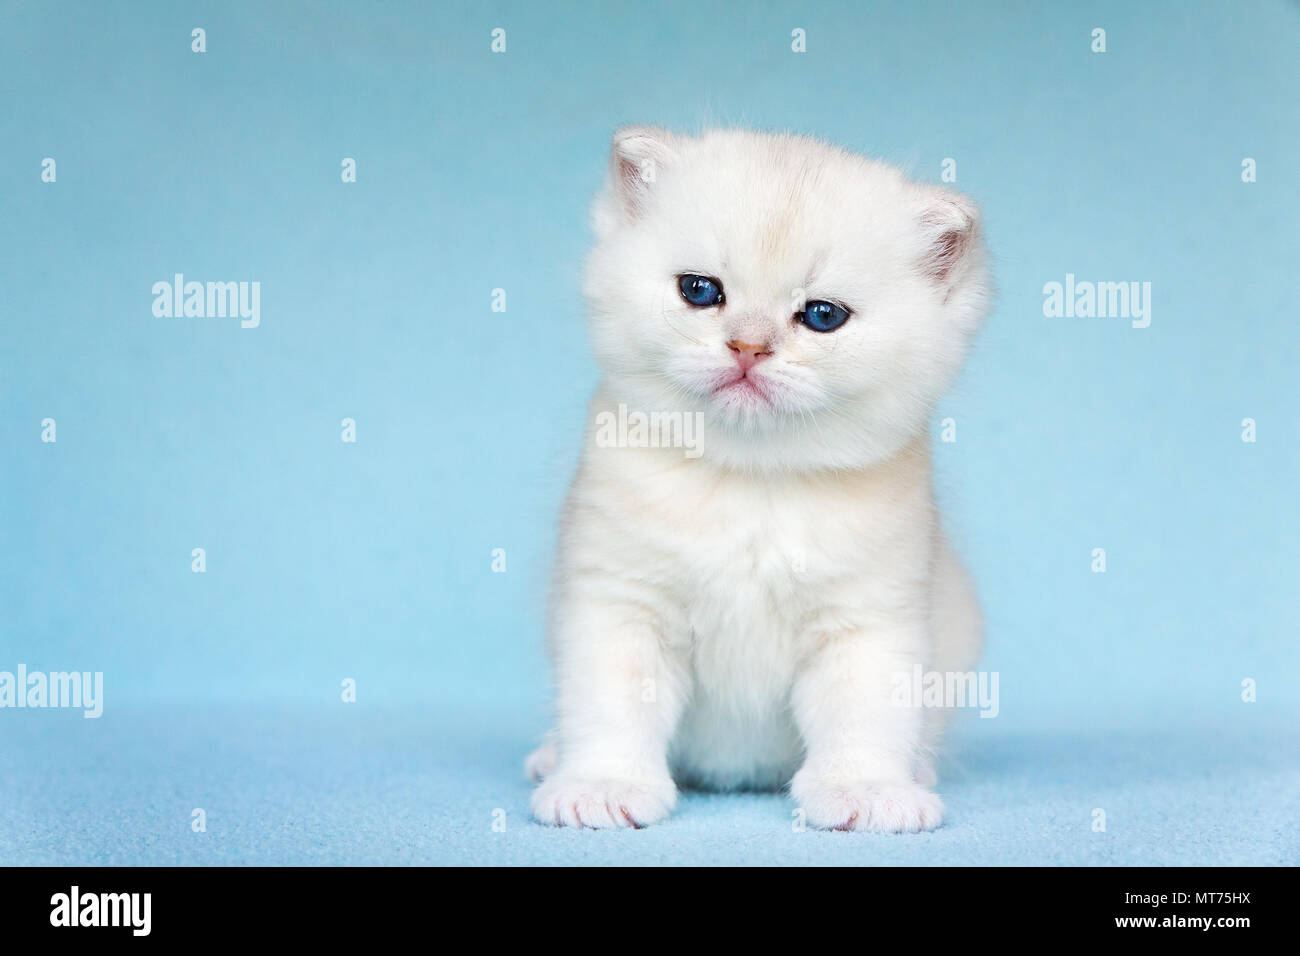 Young white kitten sits on sky blue background Stock Photo